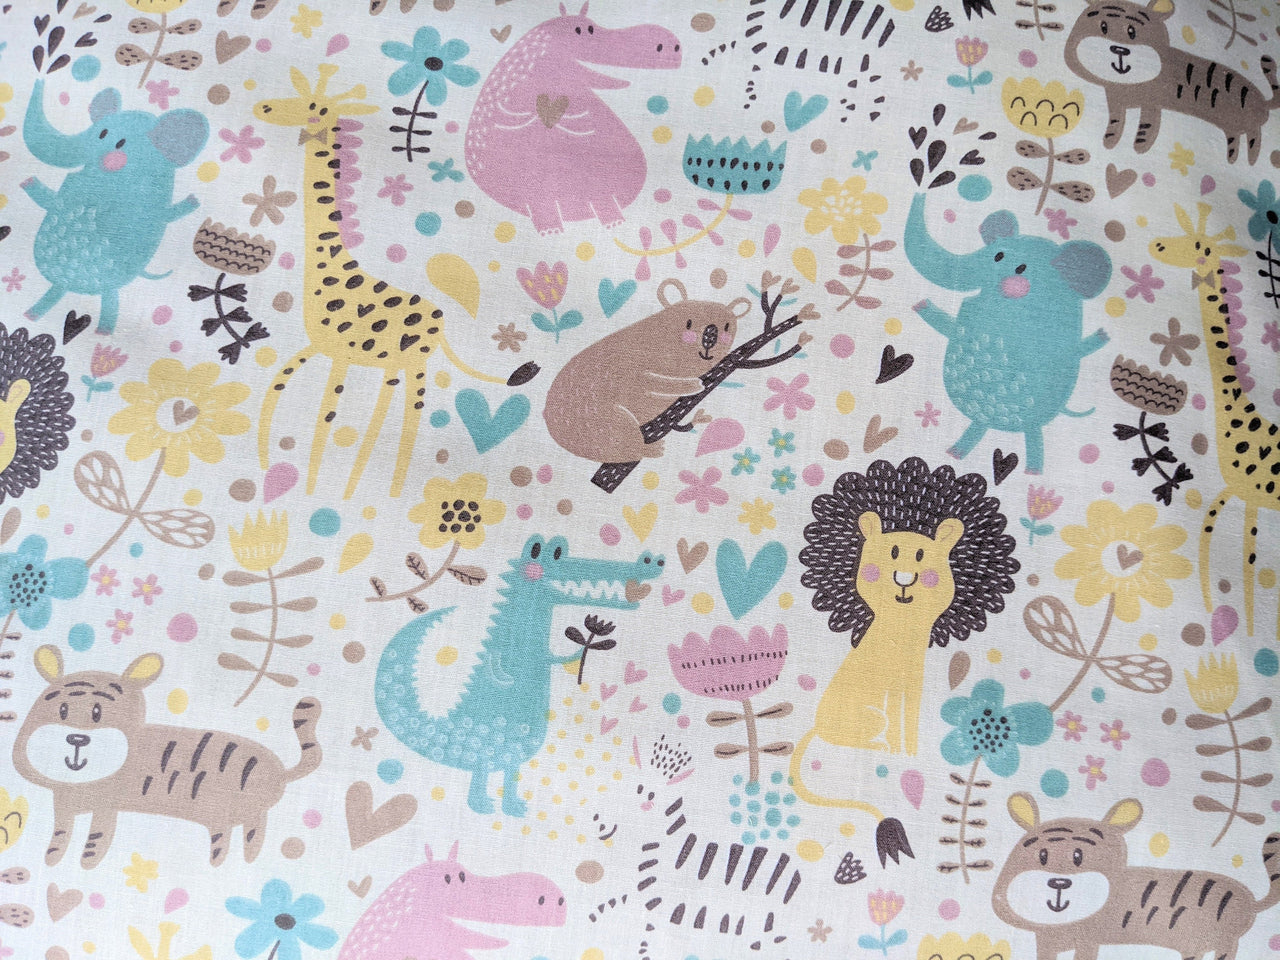 Jungle Animal Fabric, Polycotton Fabric, Love Animals Forest Fabric Sewing Fabric Nursery Fabric Quilting Craft Fabric by Half metre / metre